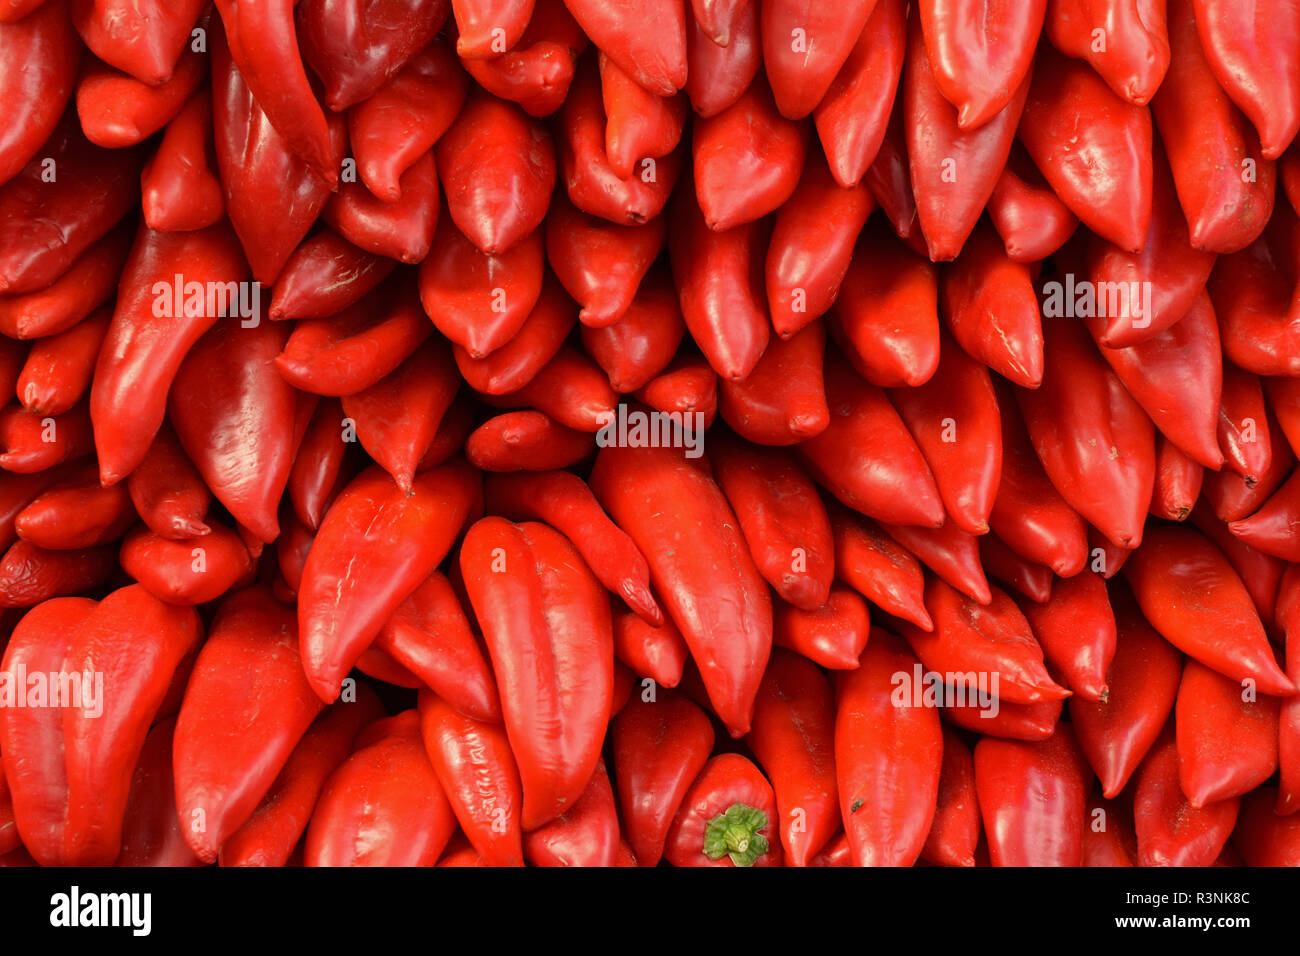 Florina red peppers background. Pile of fresh vegetables. Stock Photo